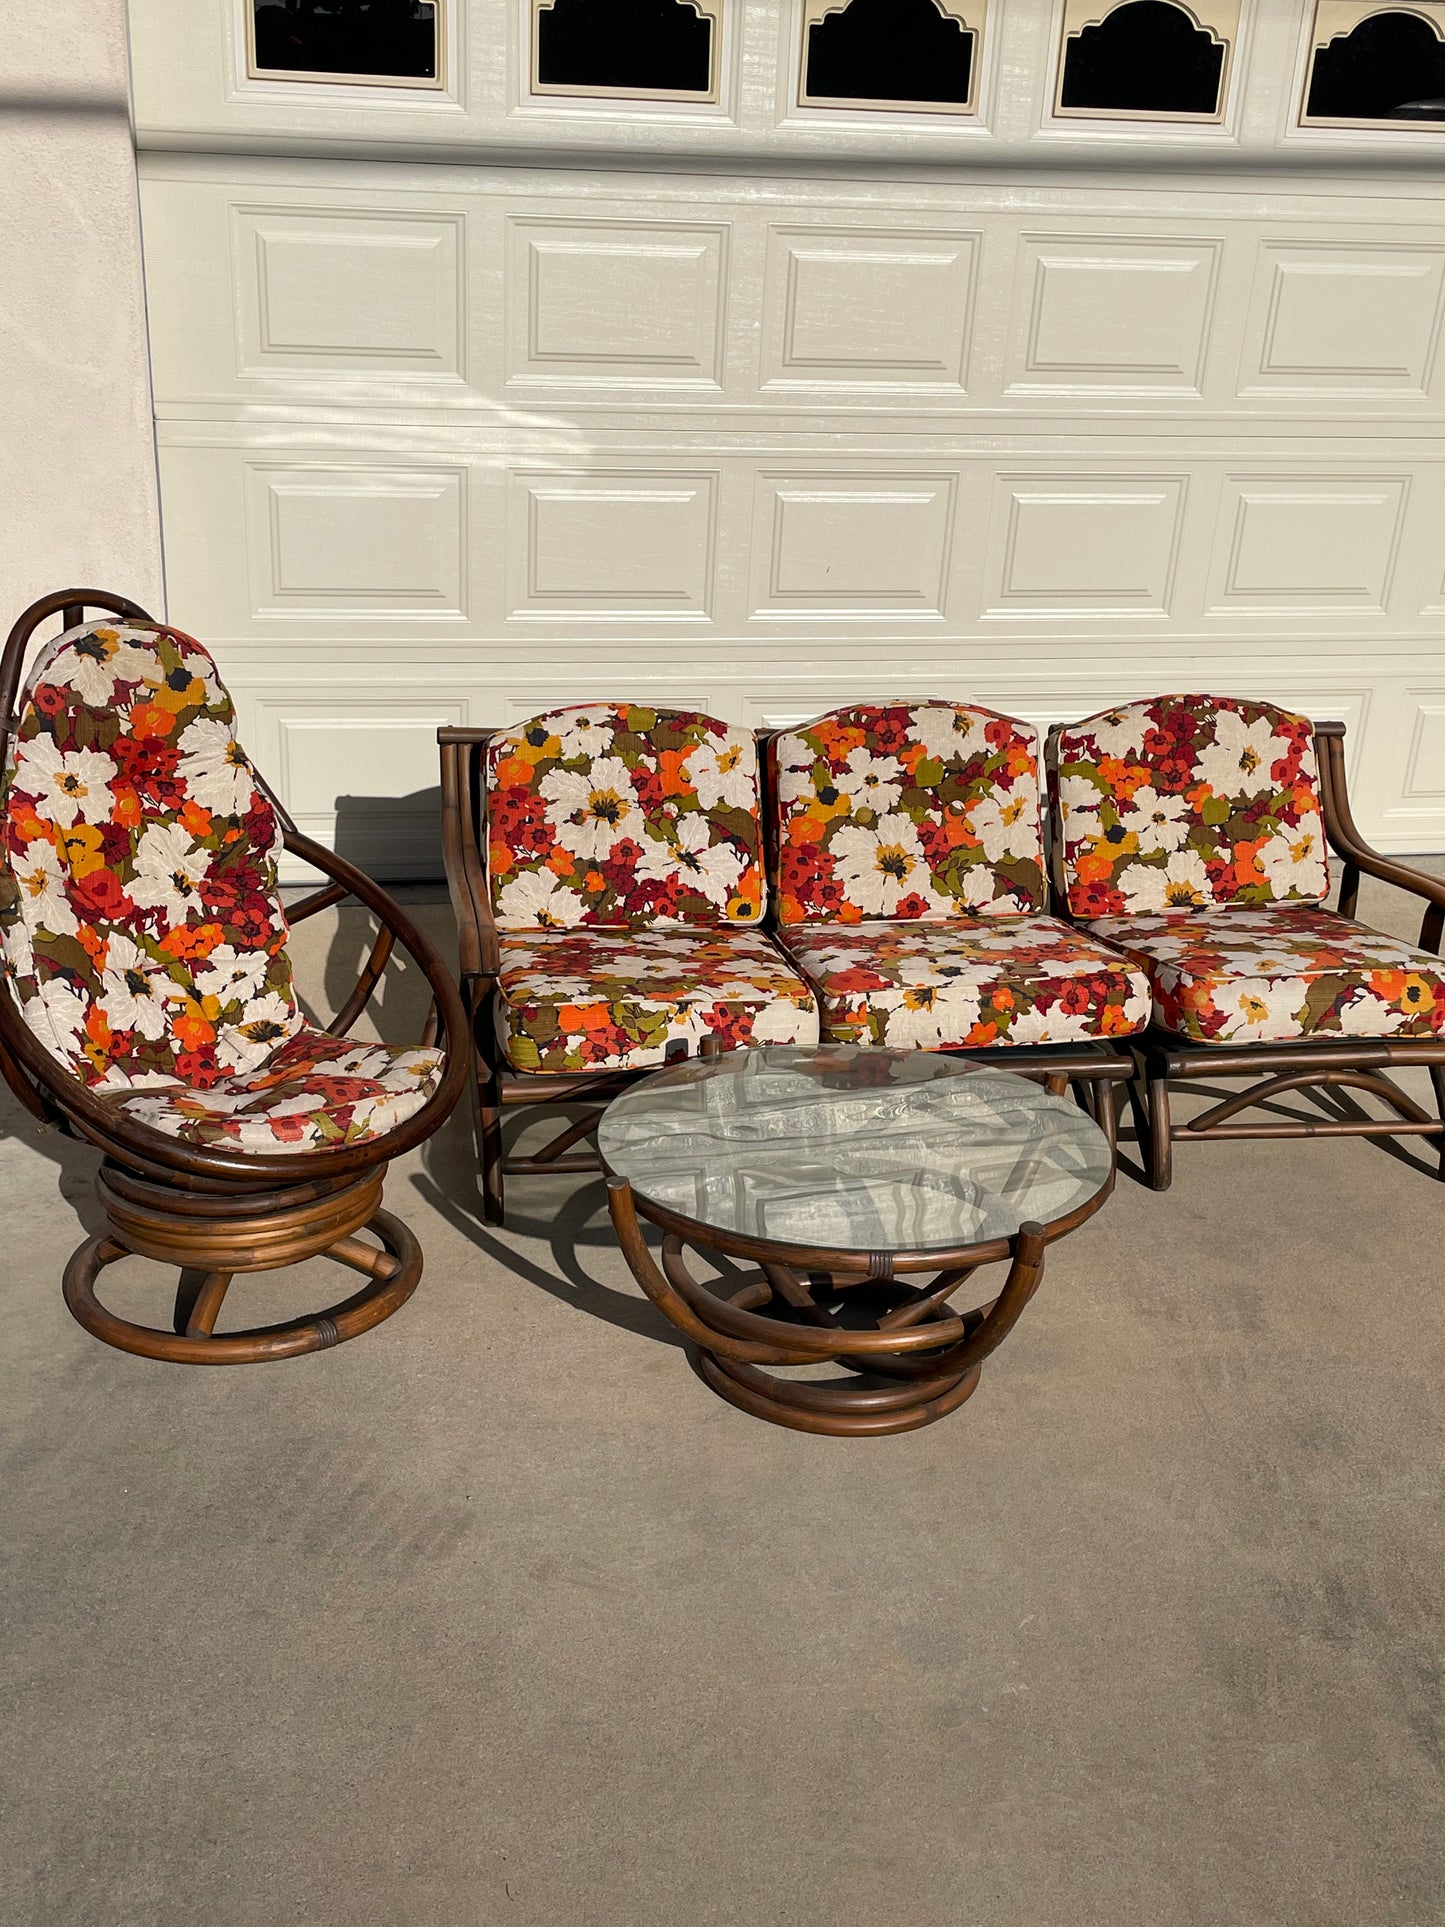 Vintage 70s Floral Rattan Couch Calif-Asia Style